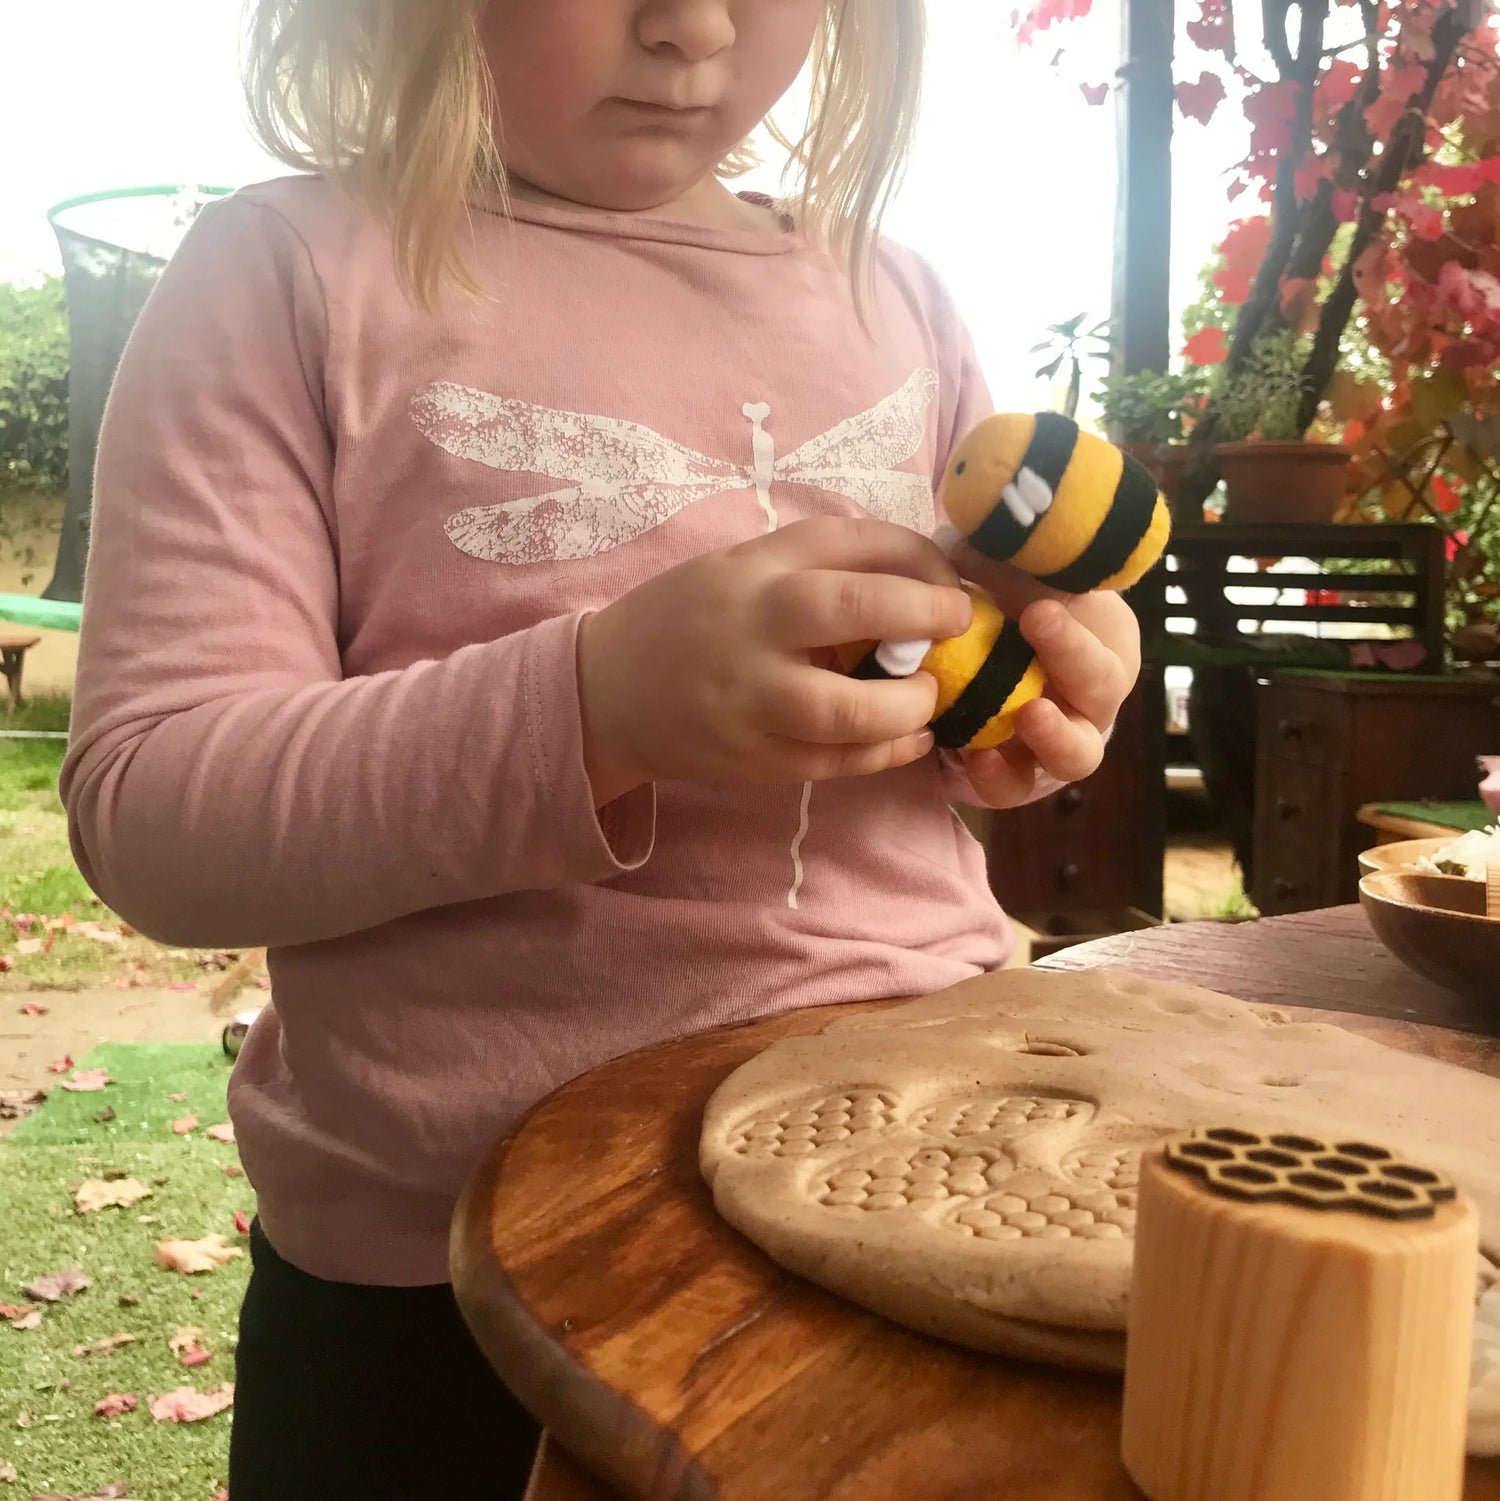 BEE PLAYDOUGH STAMPS by BEADIE BUG PLAY - The Playful Collective